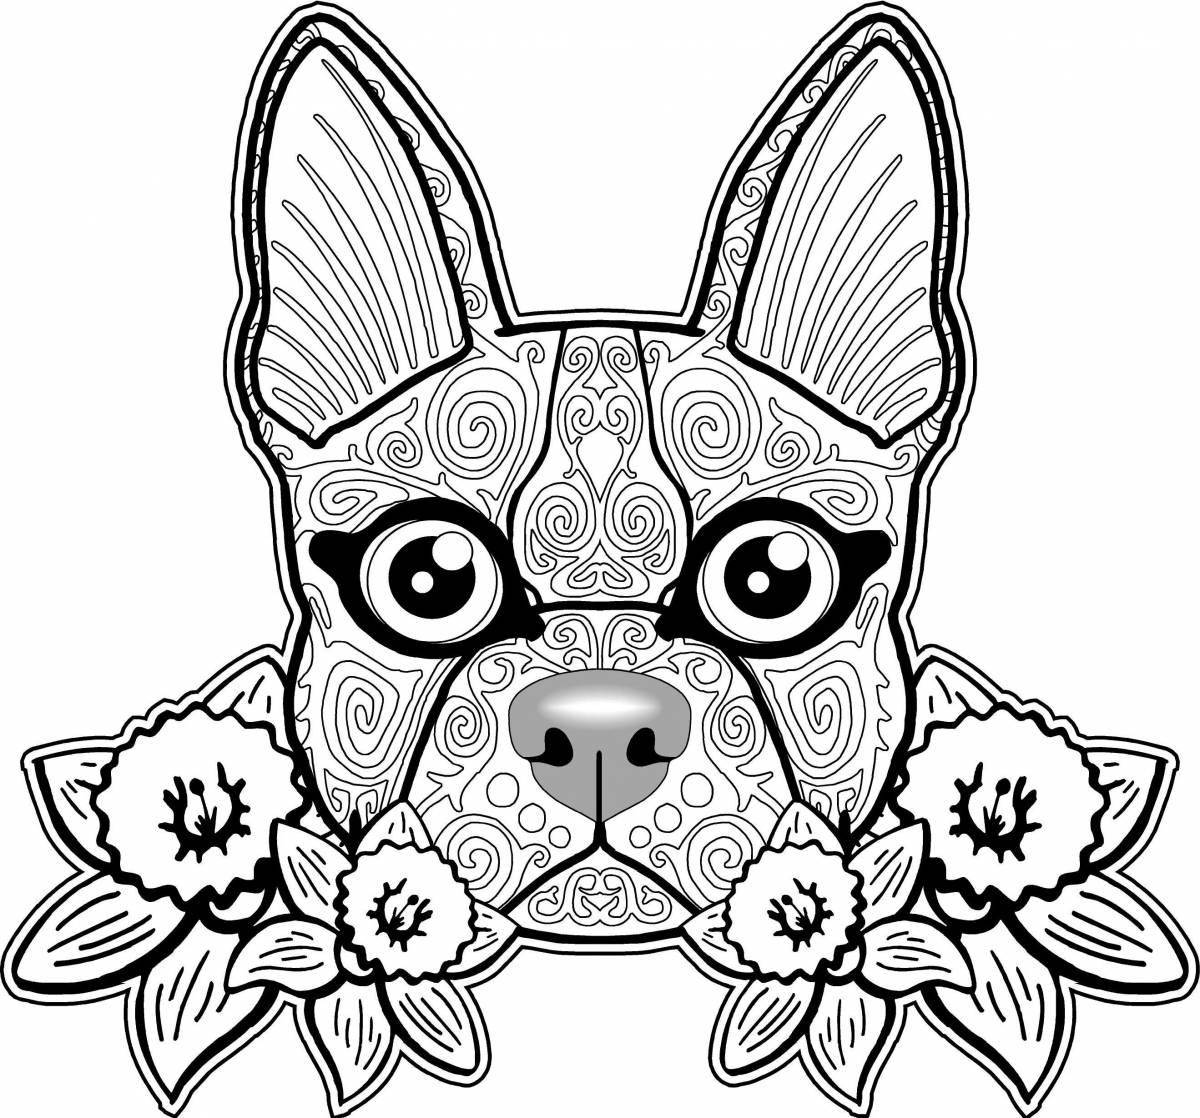 Adorable little dog coloring page